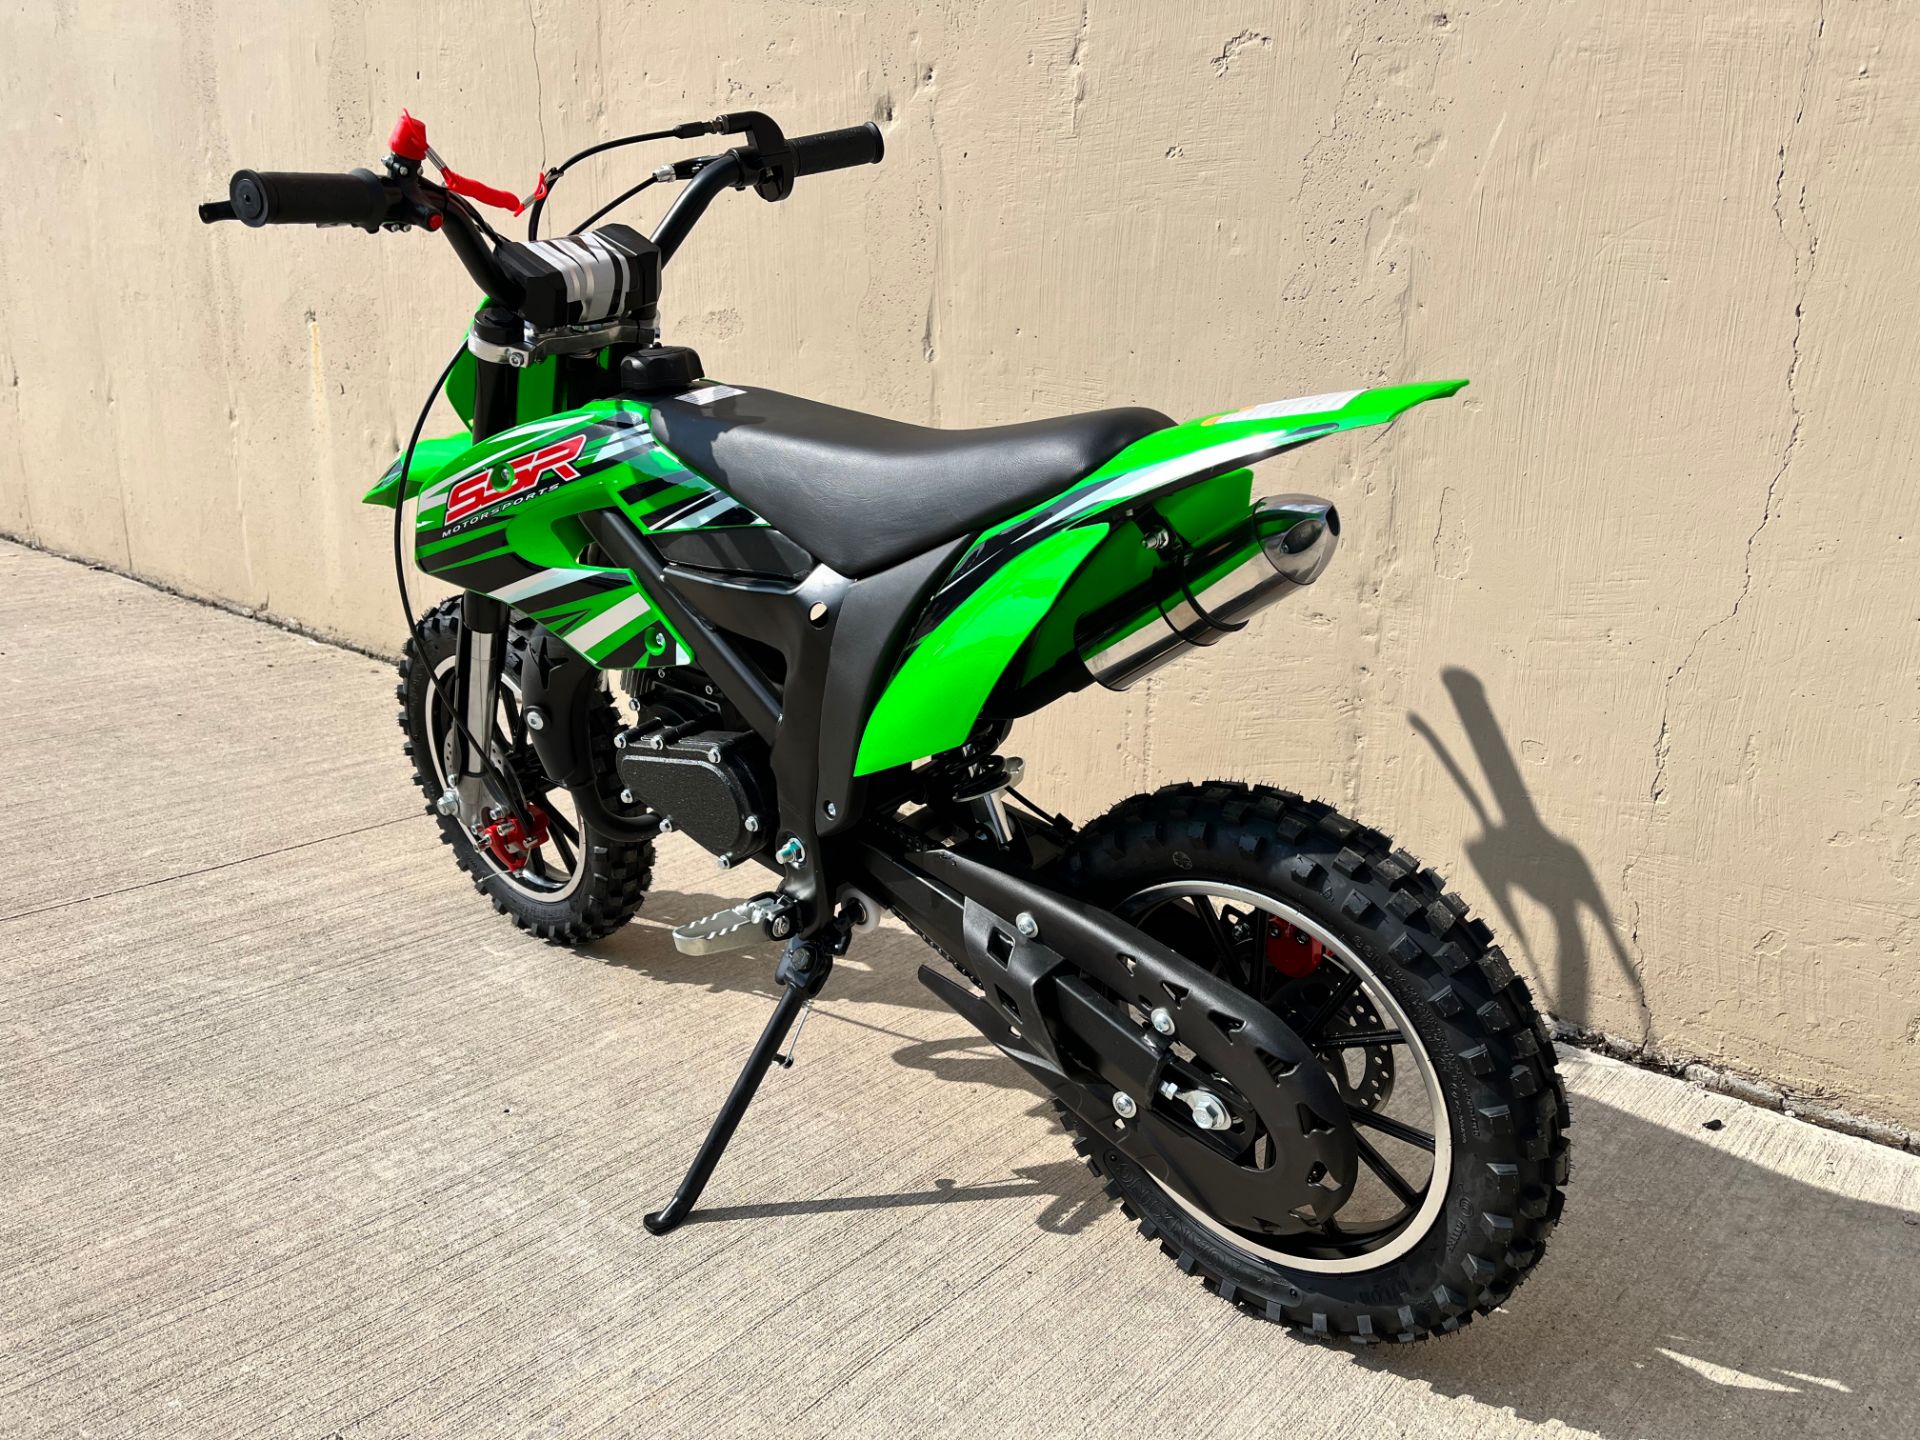 2022 SSR Motorsports SX50-A in Roselle, Illinois - Photo 9